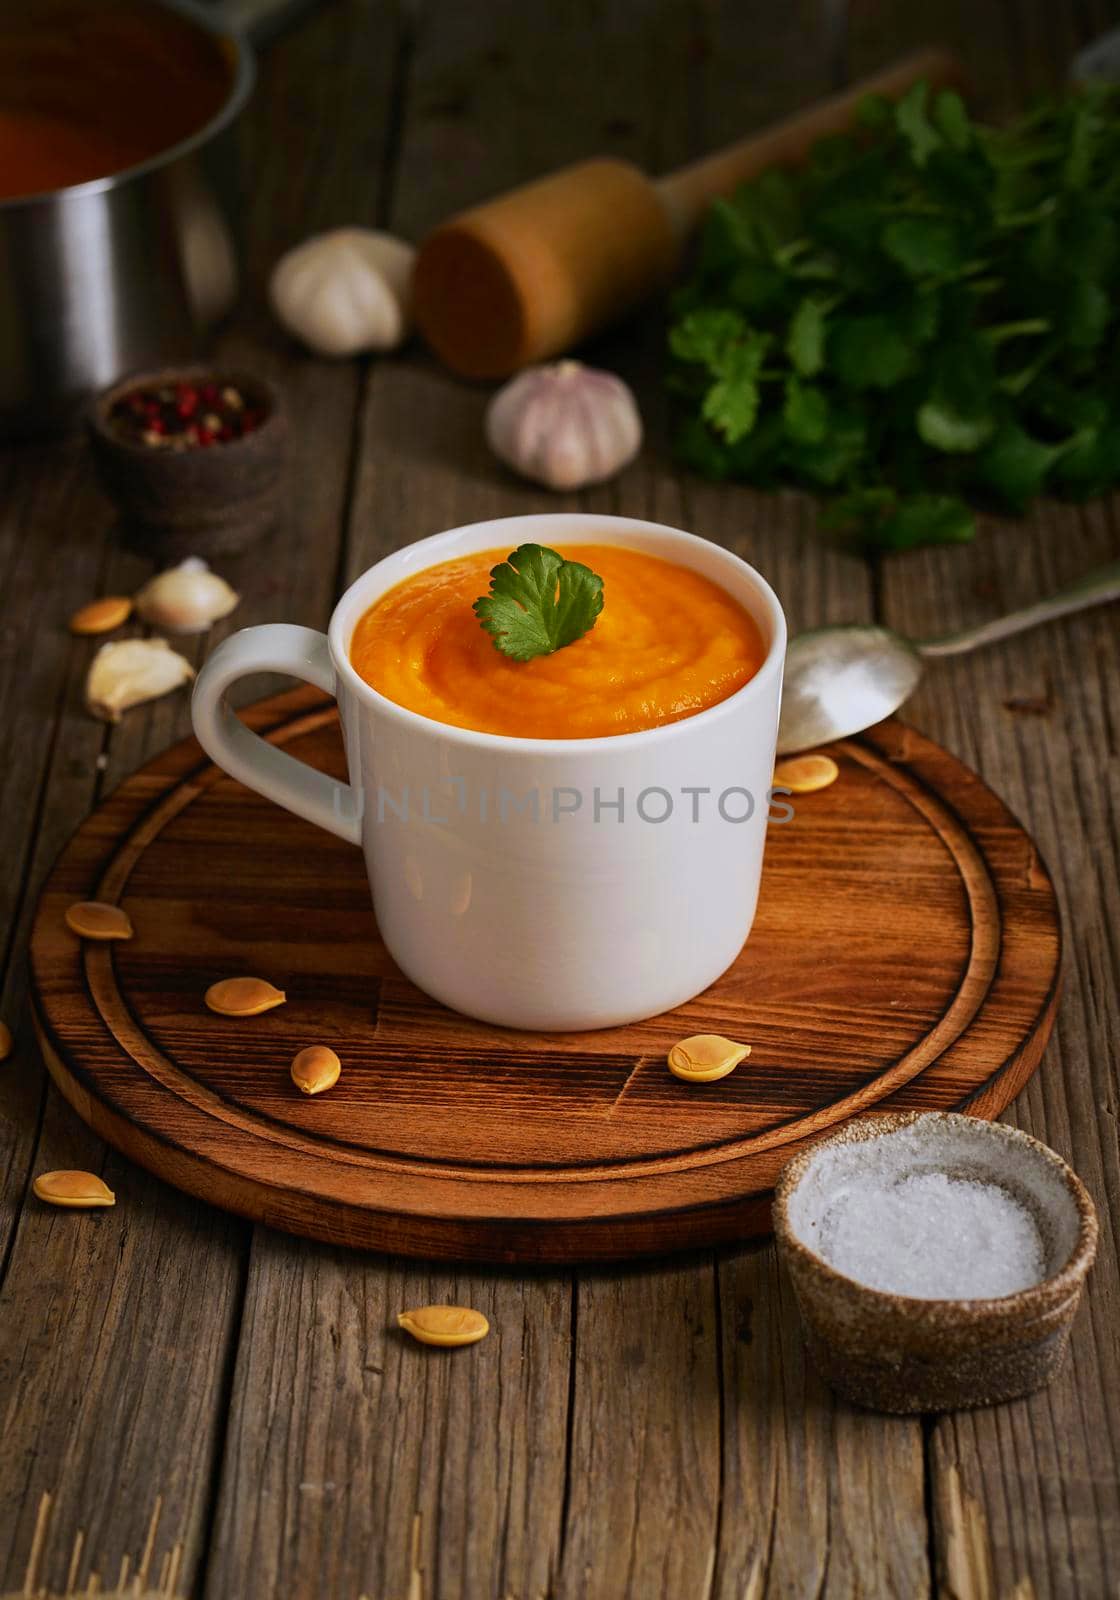 Pupmkin cream soup in cup on brown wooden table, vertical, side view. Dietary vegetarian puree on cutting board with parsley, garlic.